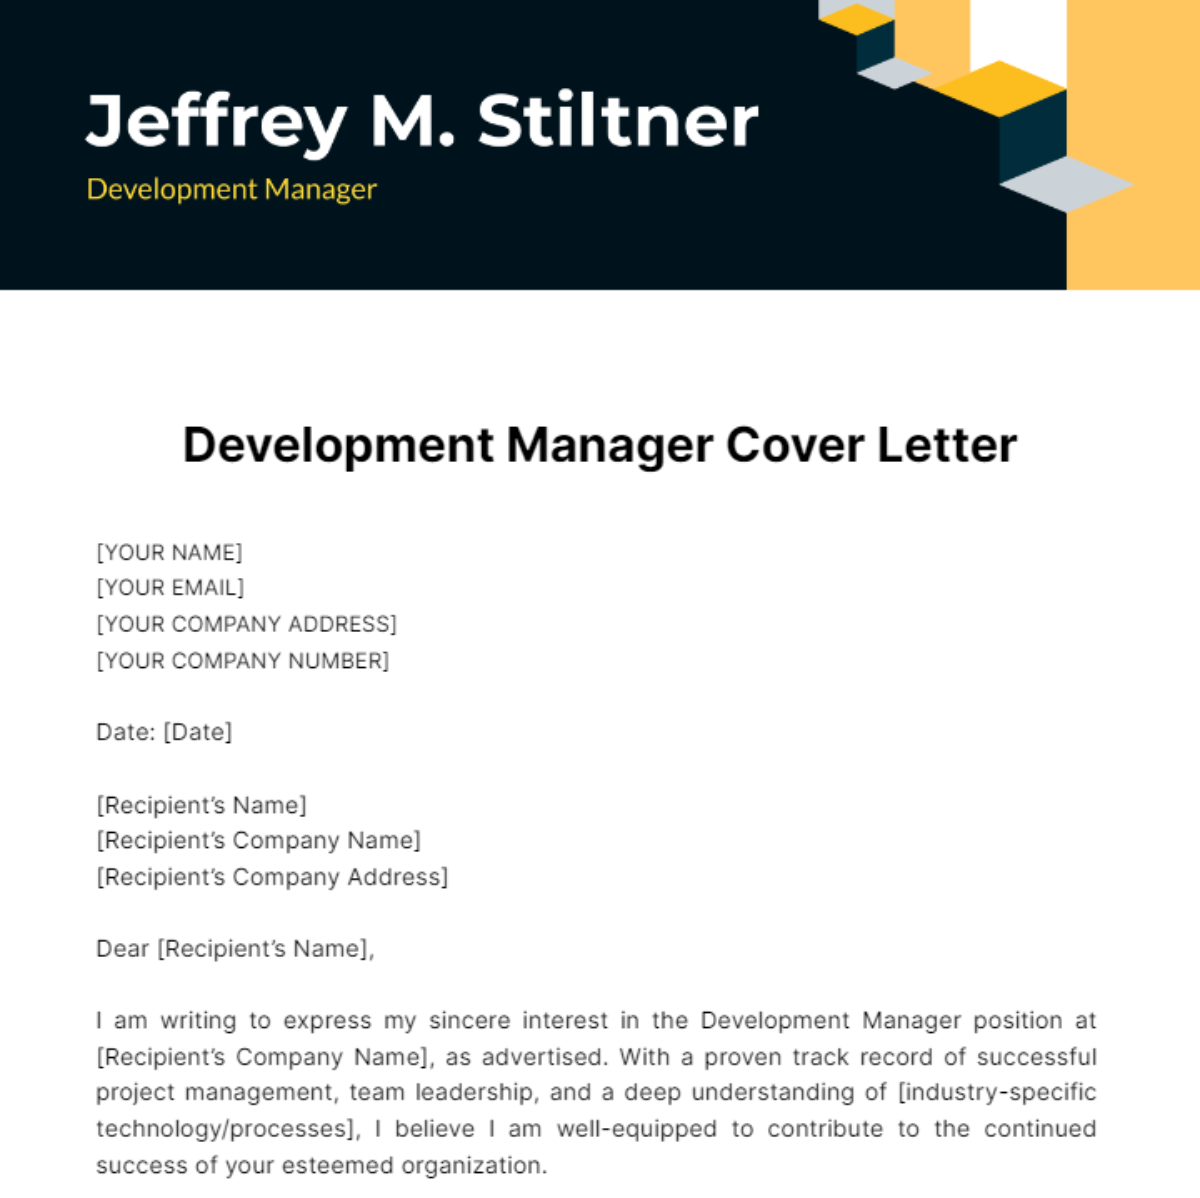 Development Manager Cover Letter Template